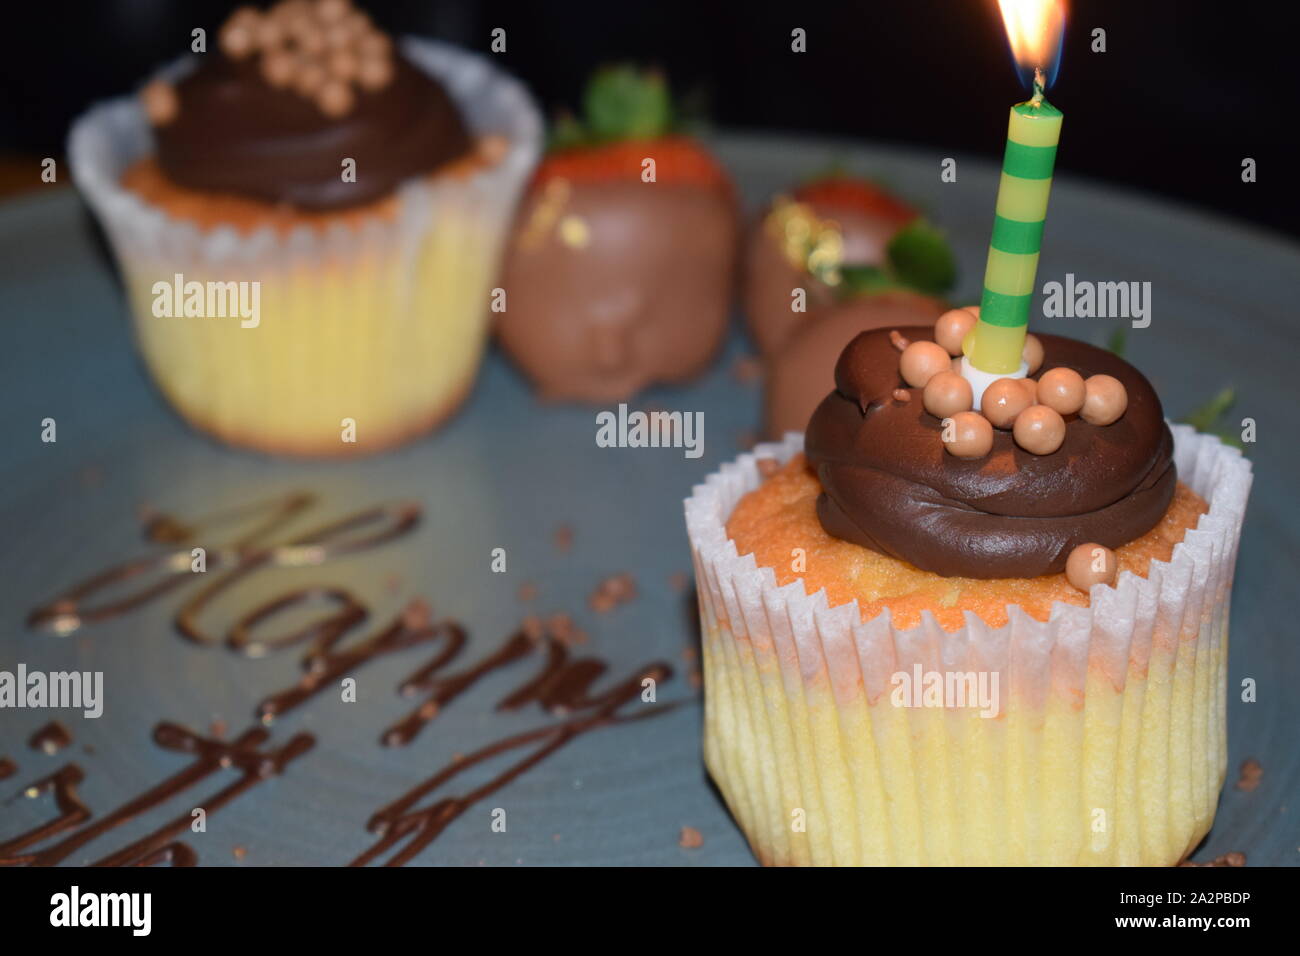 Cake for birthday in London. Food is our passion. Stock Photo